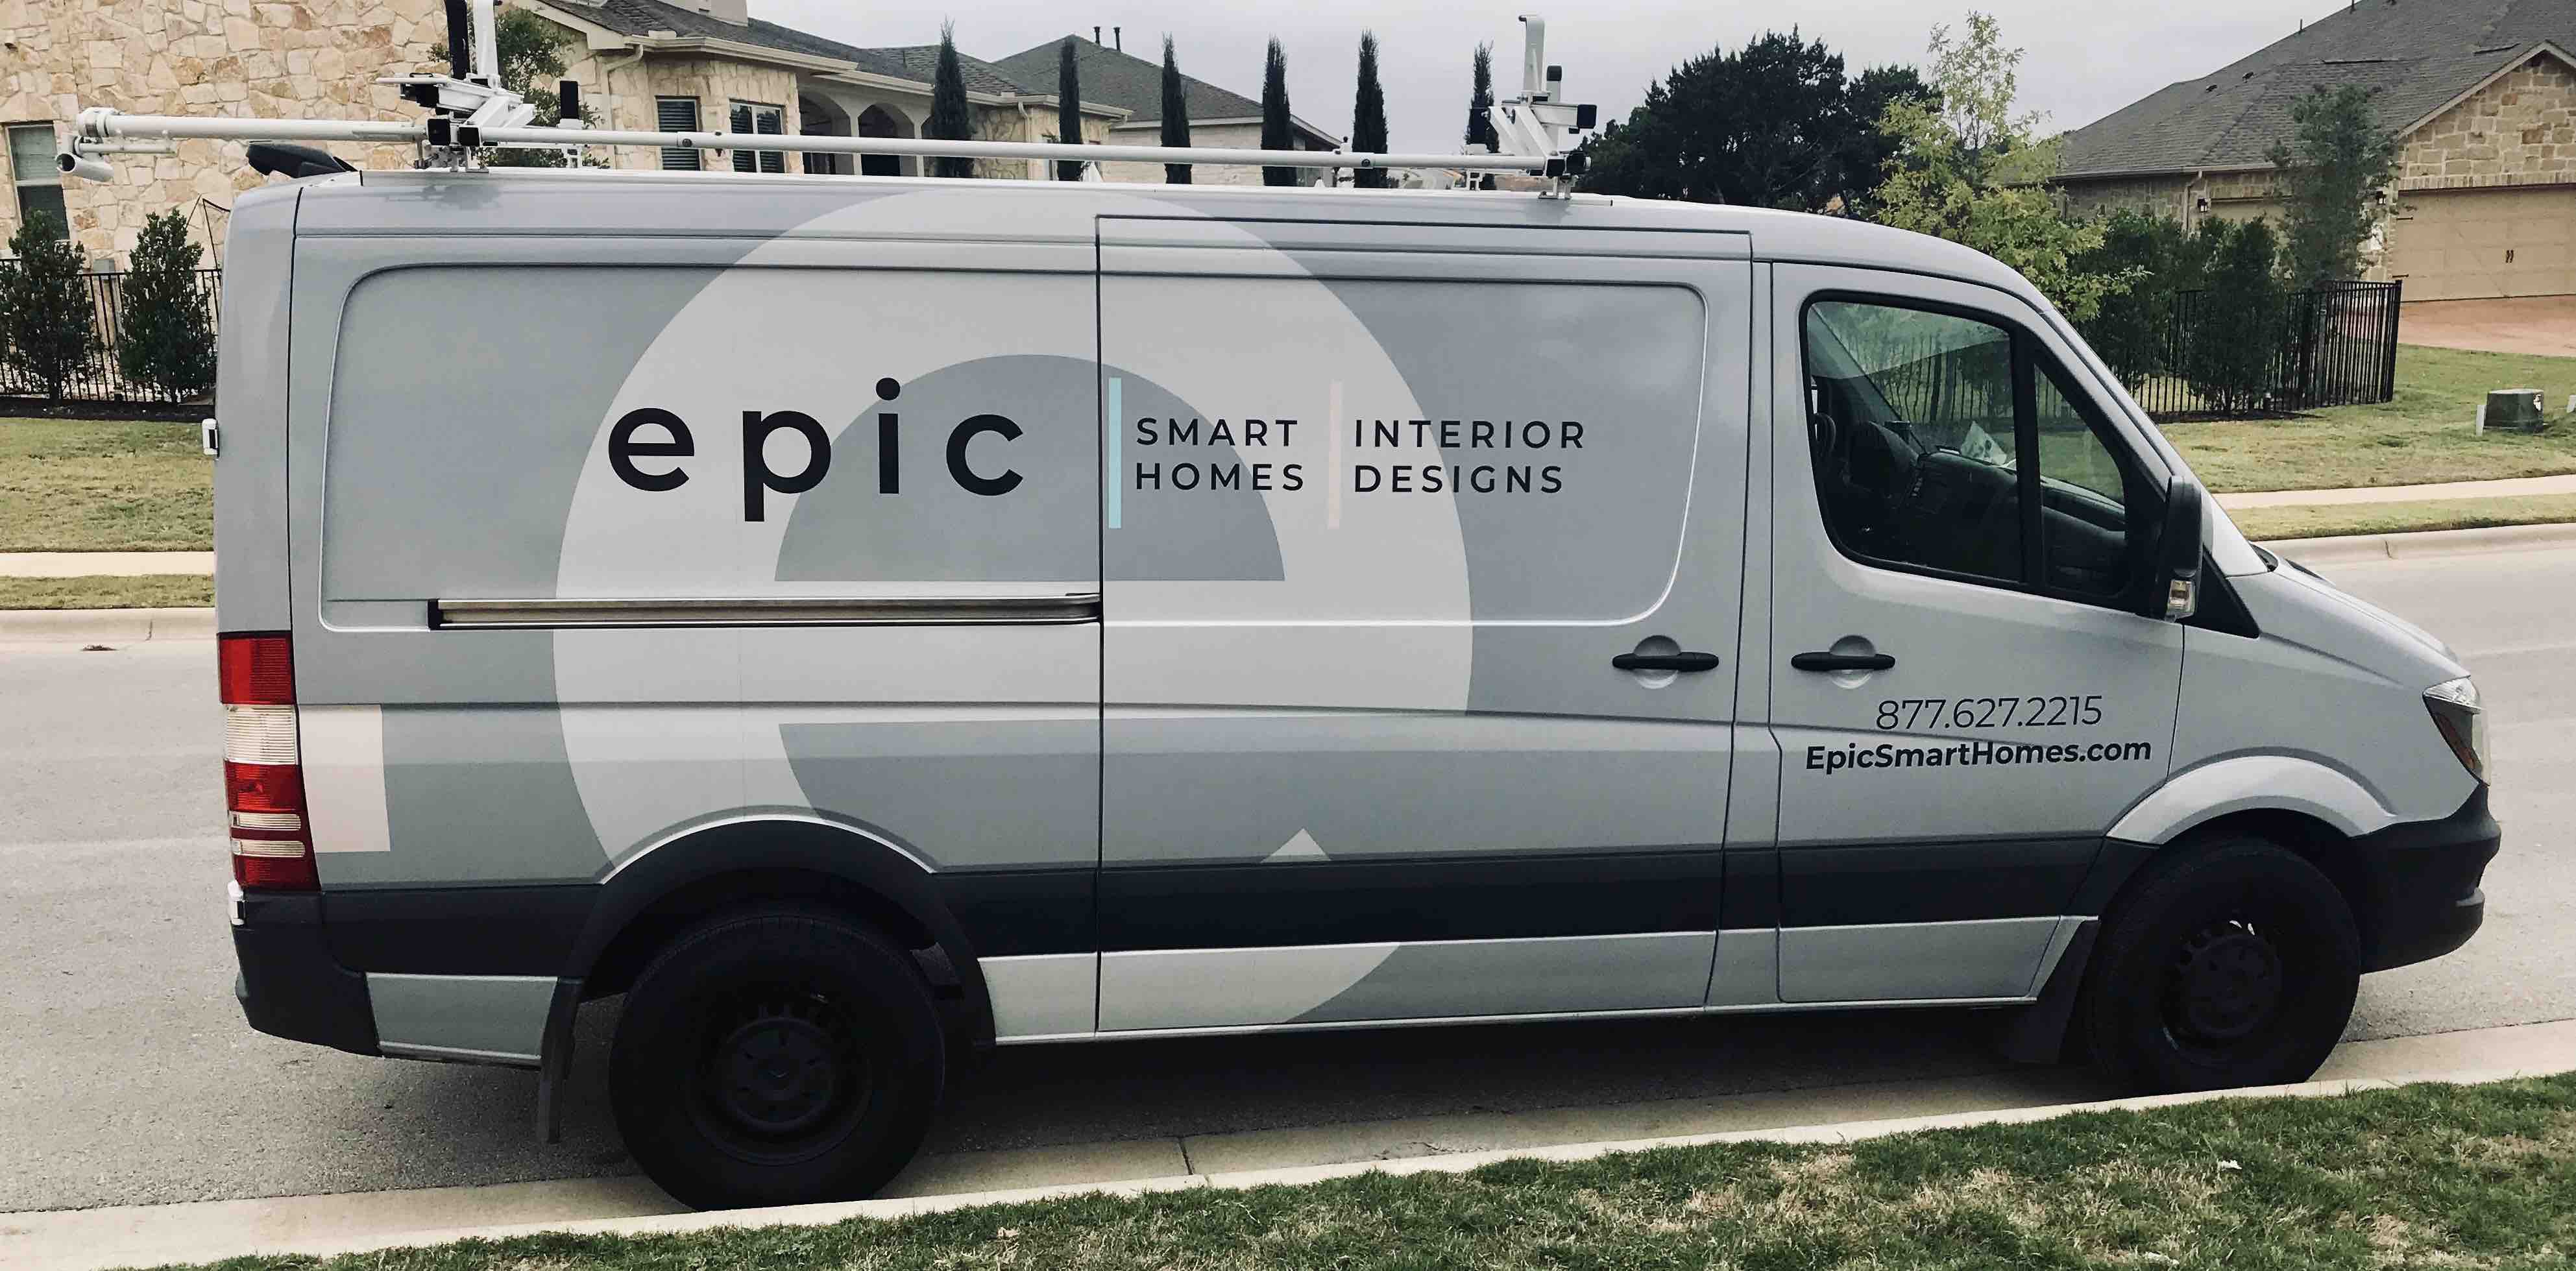 Epic Smart Home Vans are on the road in Central Texas